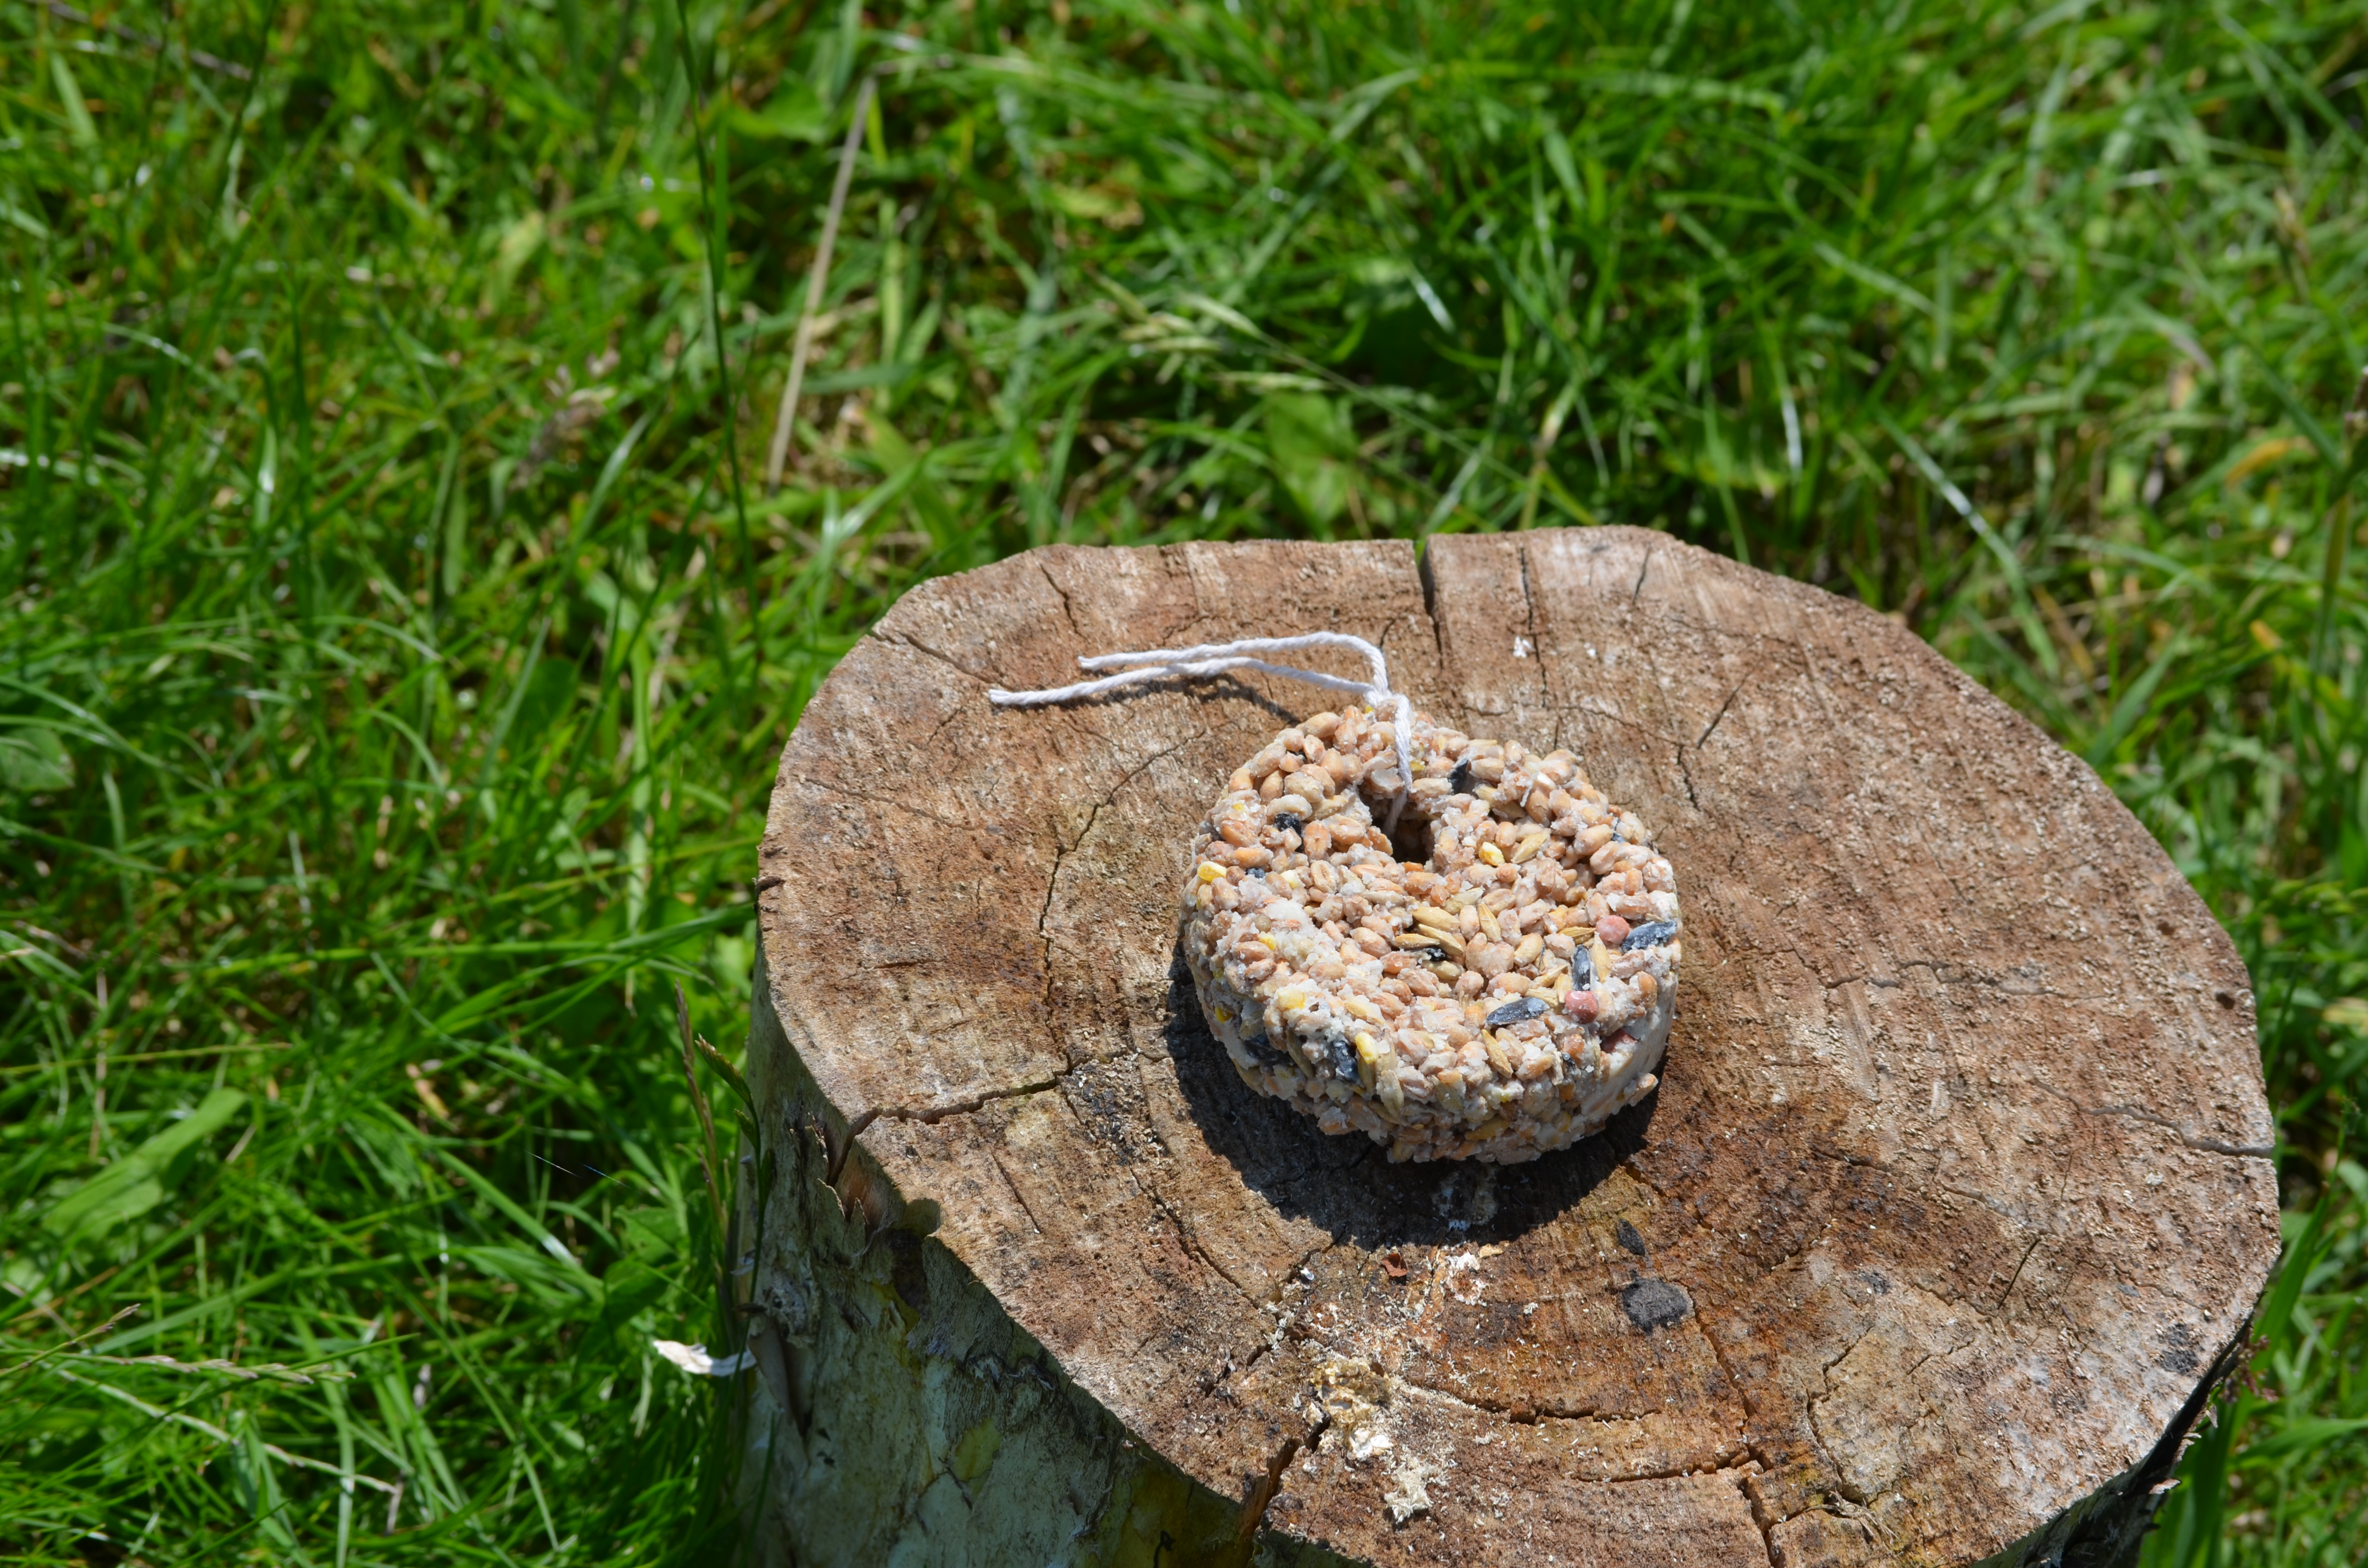 Close up of a natural bird feeder with string through it